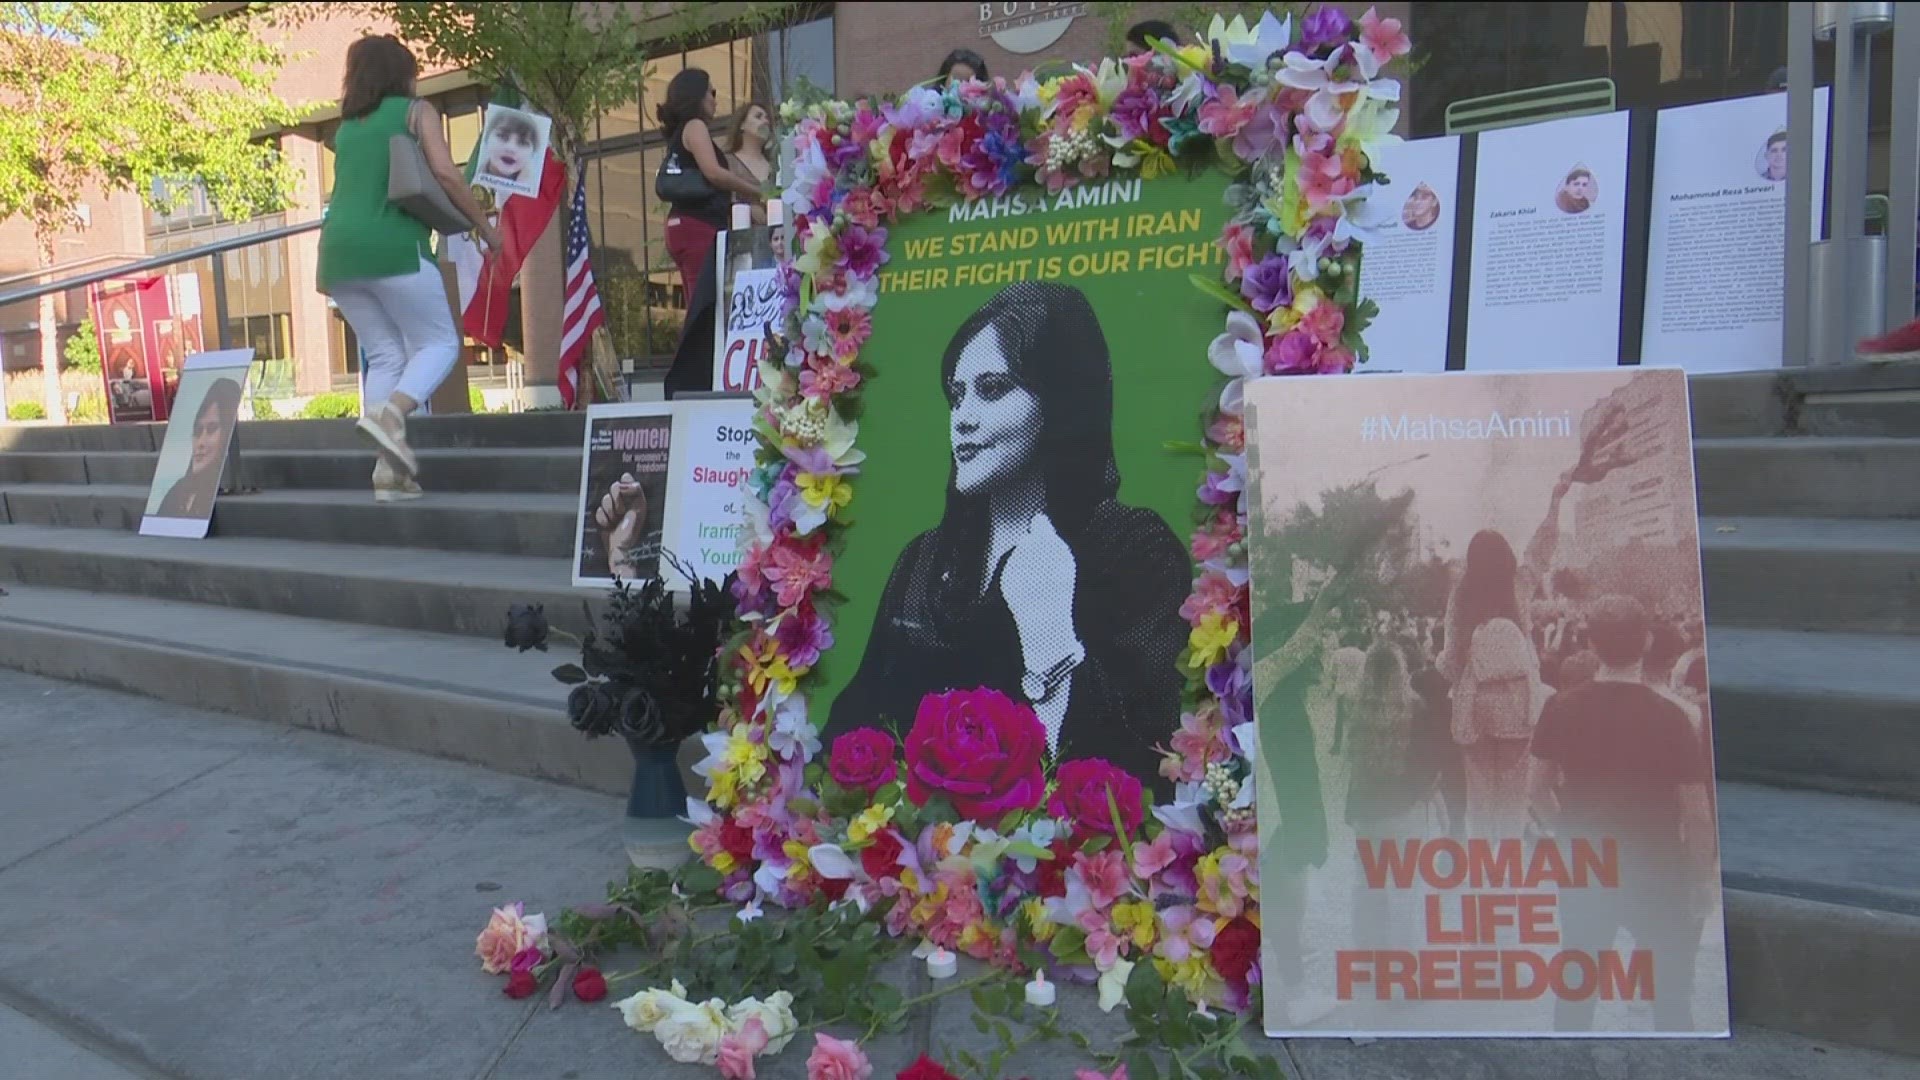 The movement was sparked after the death of 22-year-old Mahsa Amini, who died in the custody of Iran's Morality Police.